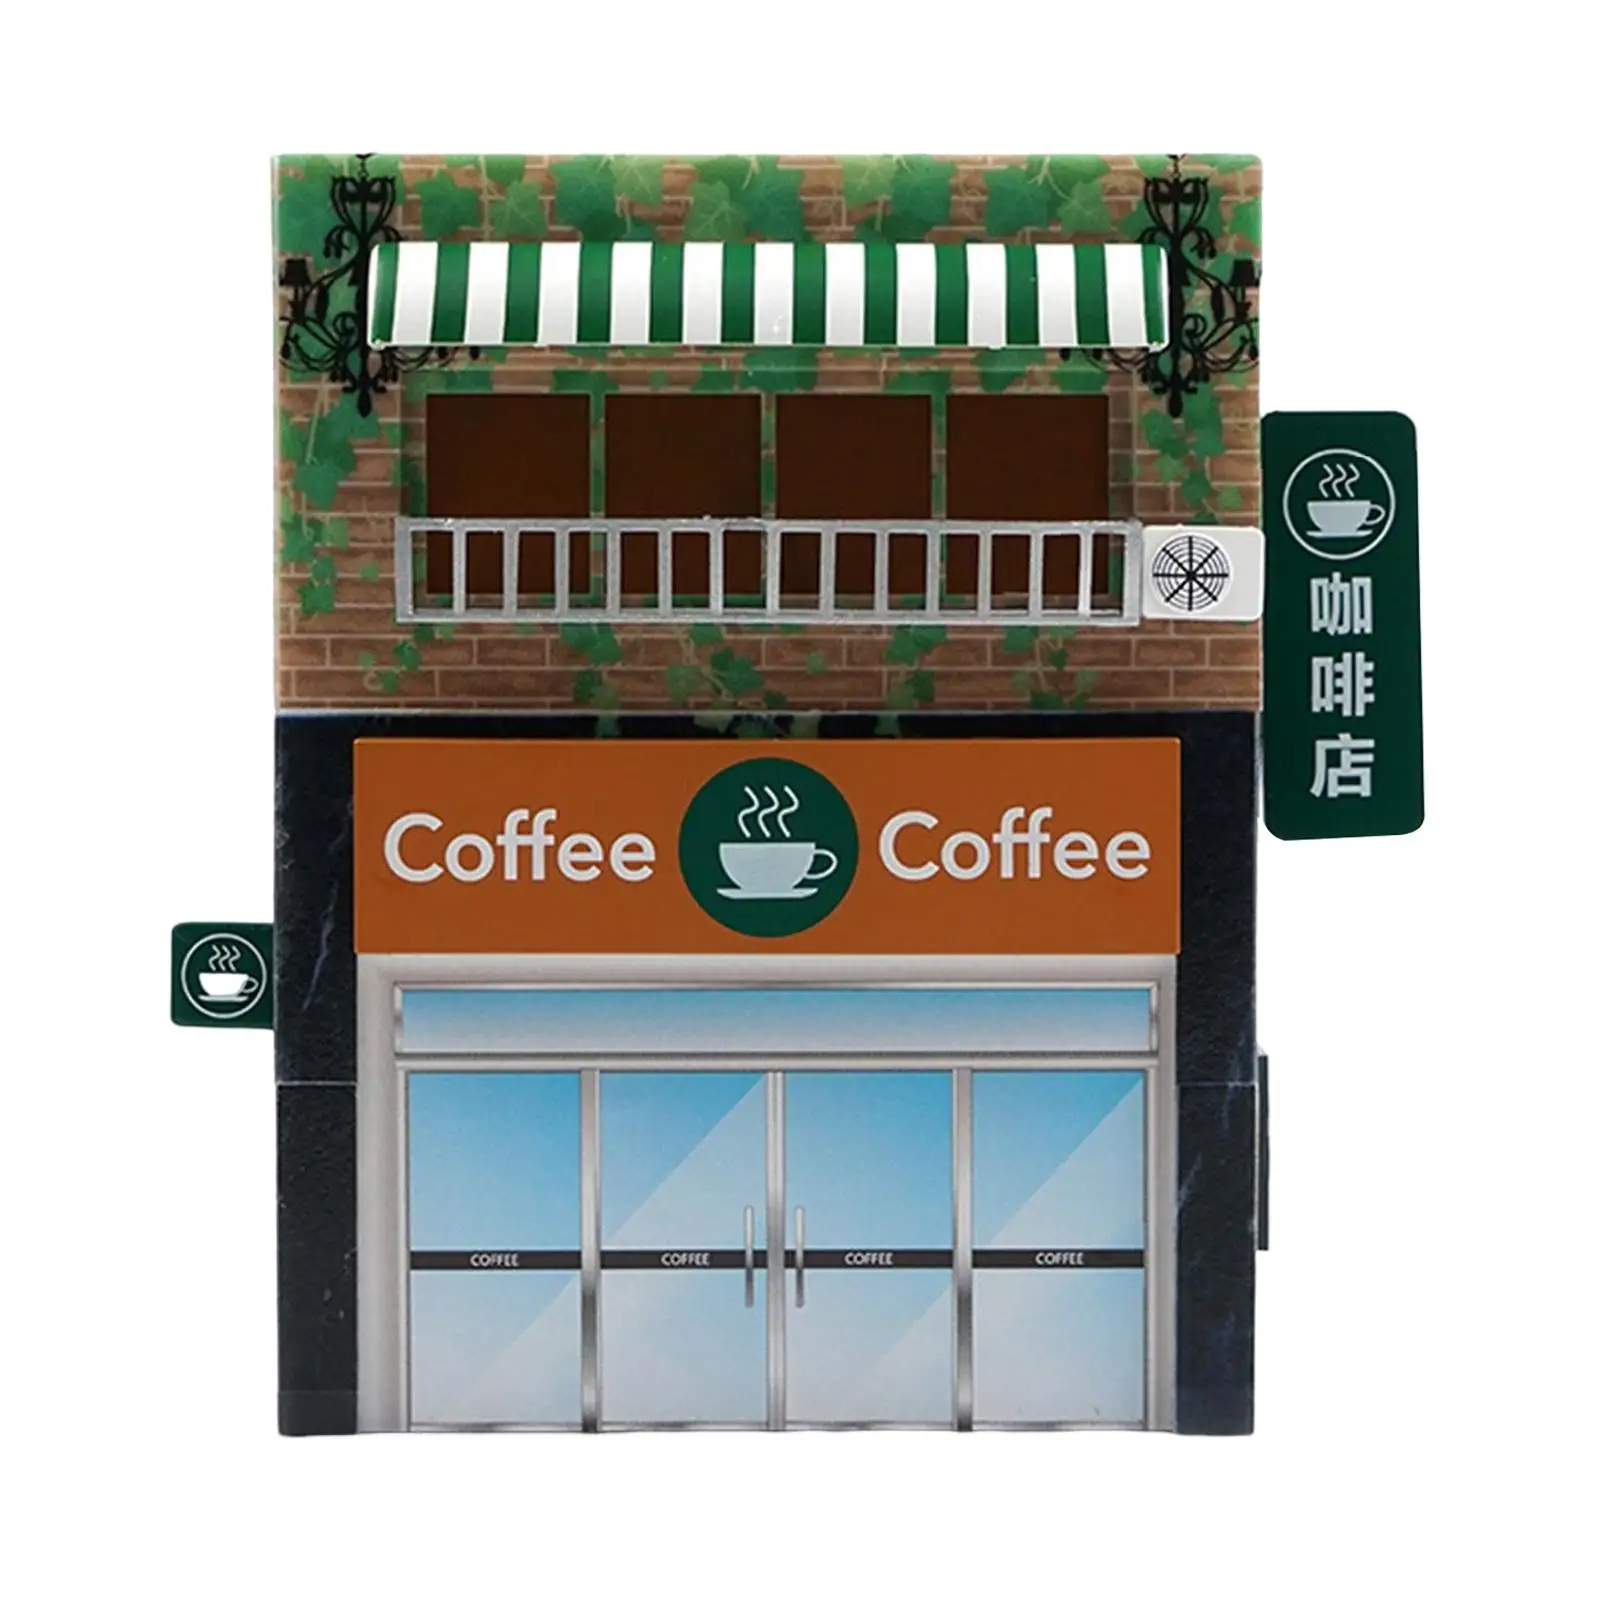 1:64 Scale Miniature Coffee Shop Collectibles Decoration Gifts Simulation Cafe